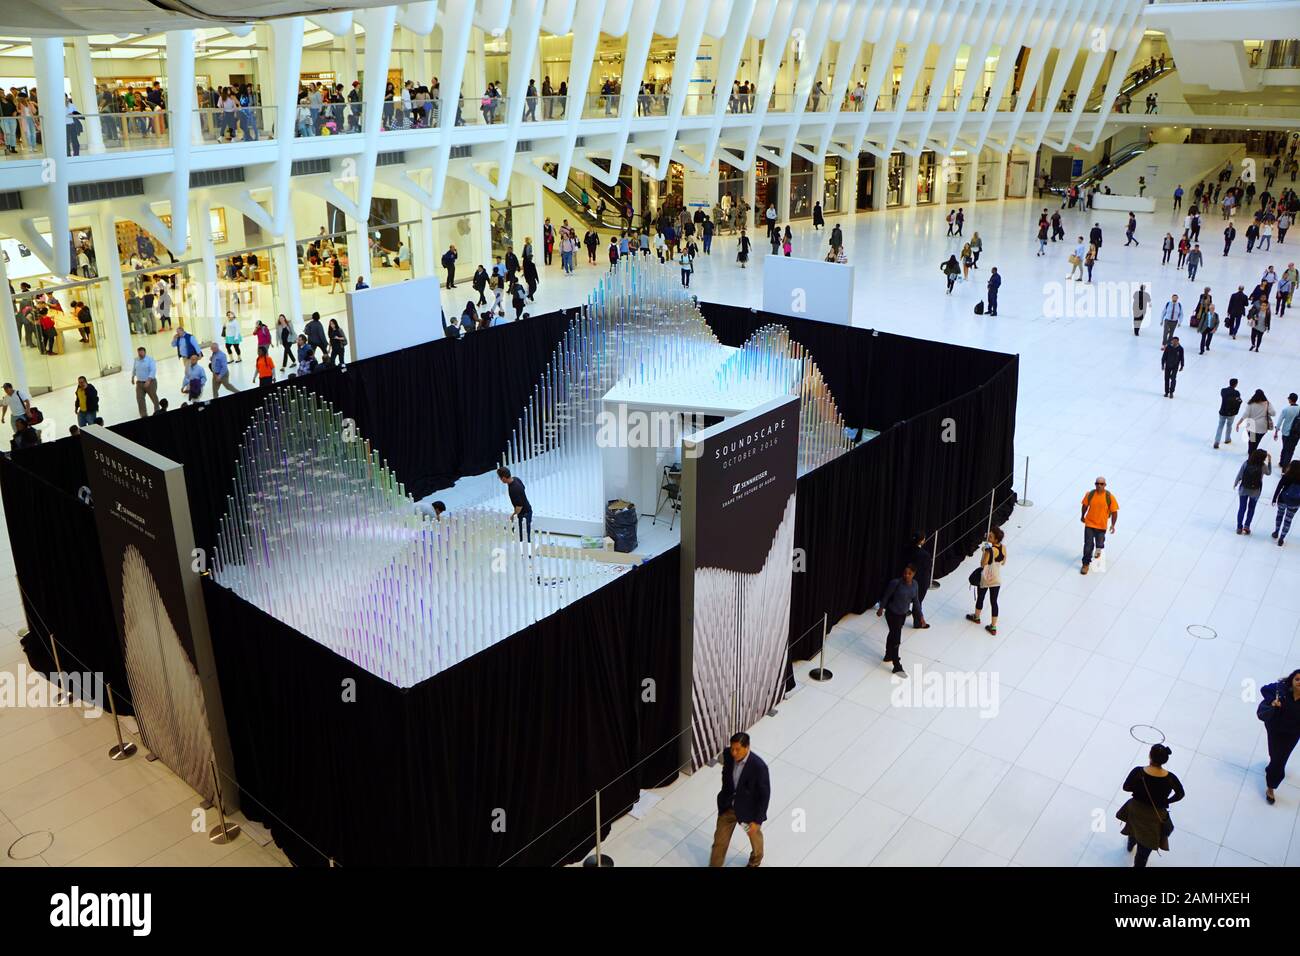 Sennheiser soundscape display and visitors at the Oculus in New York City Stock Photo